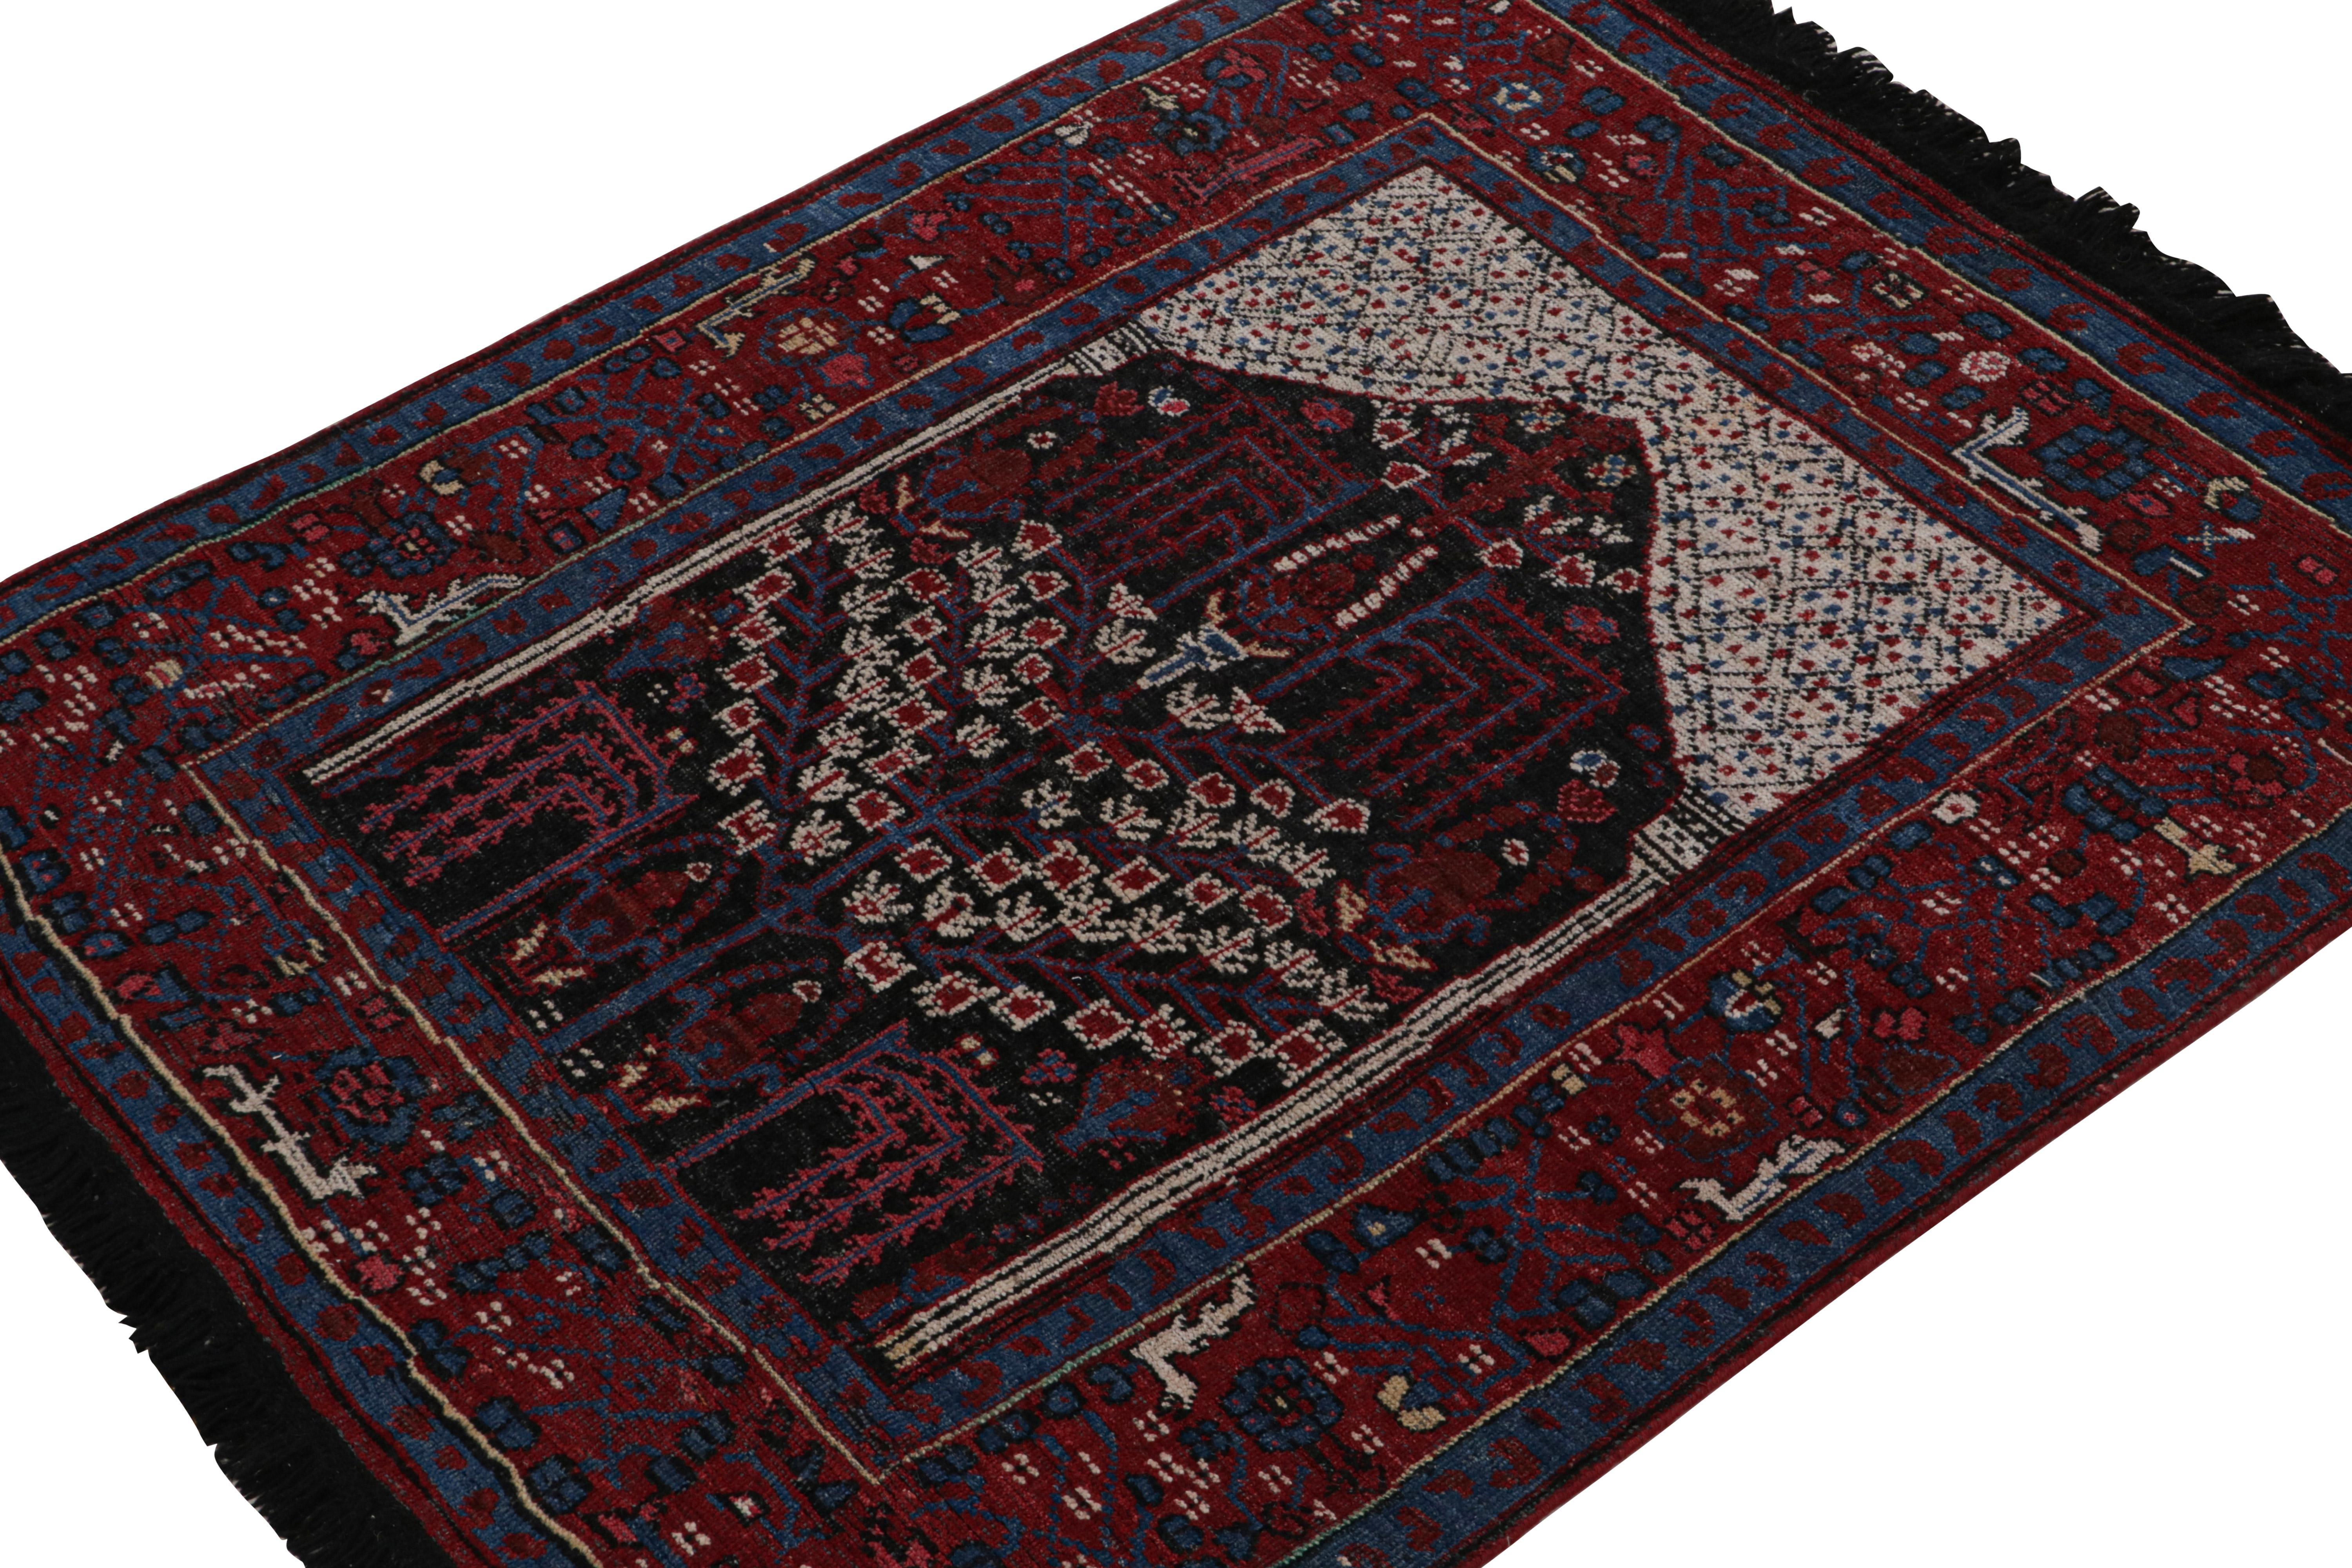 This 4x5 rug is a grand new entry to Rug & Kilim’s Burano collection. Hand-knotted in wool.

Further on the Design: 

Inspired by antique tribal rugs, this rug revels in blue, red & black with defined movement and traditional sensibility. Keen eyes